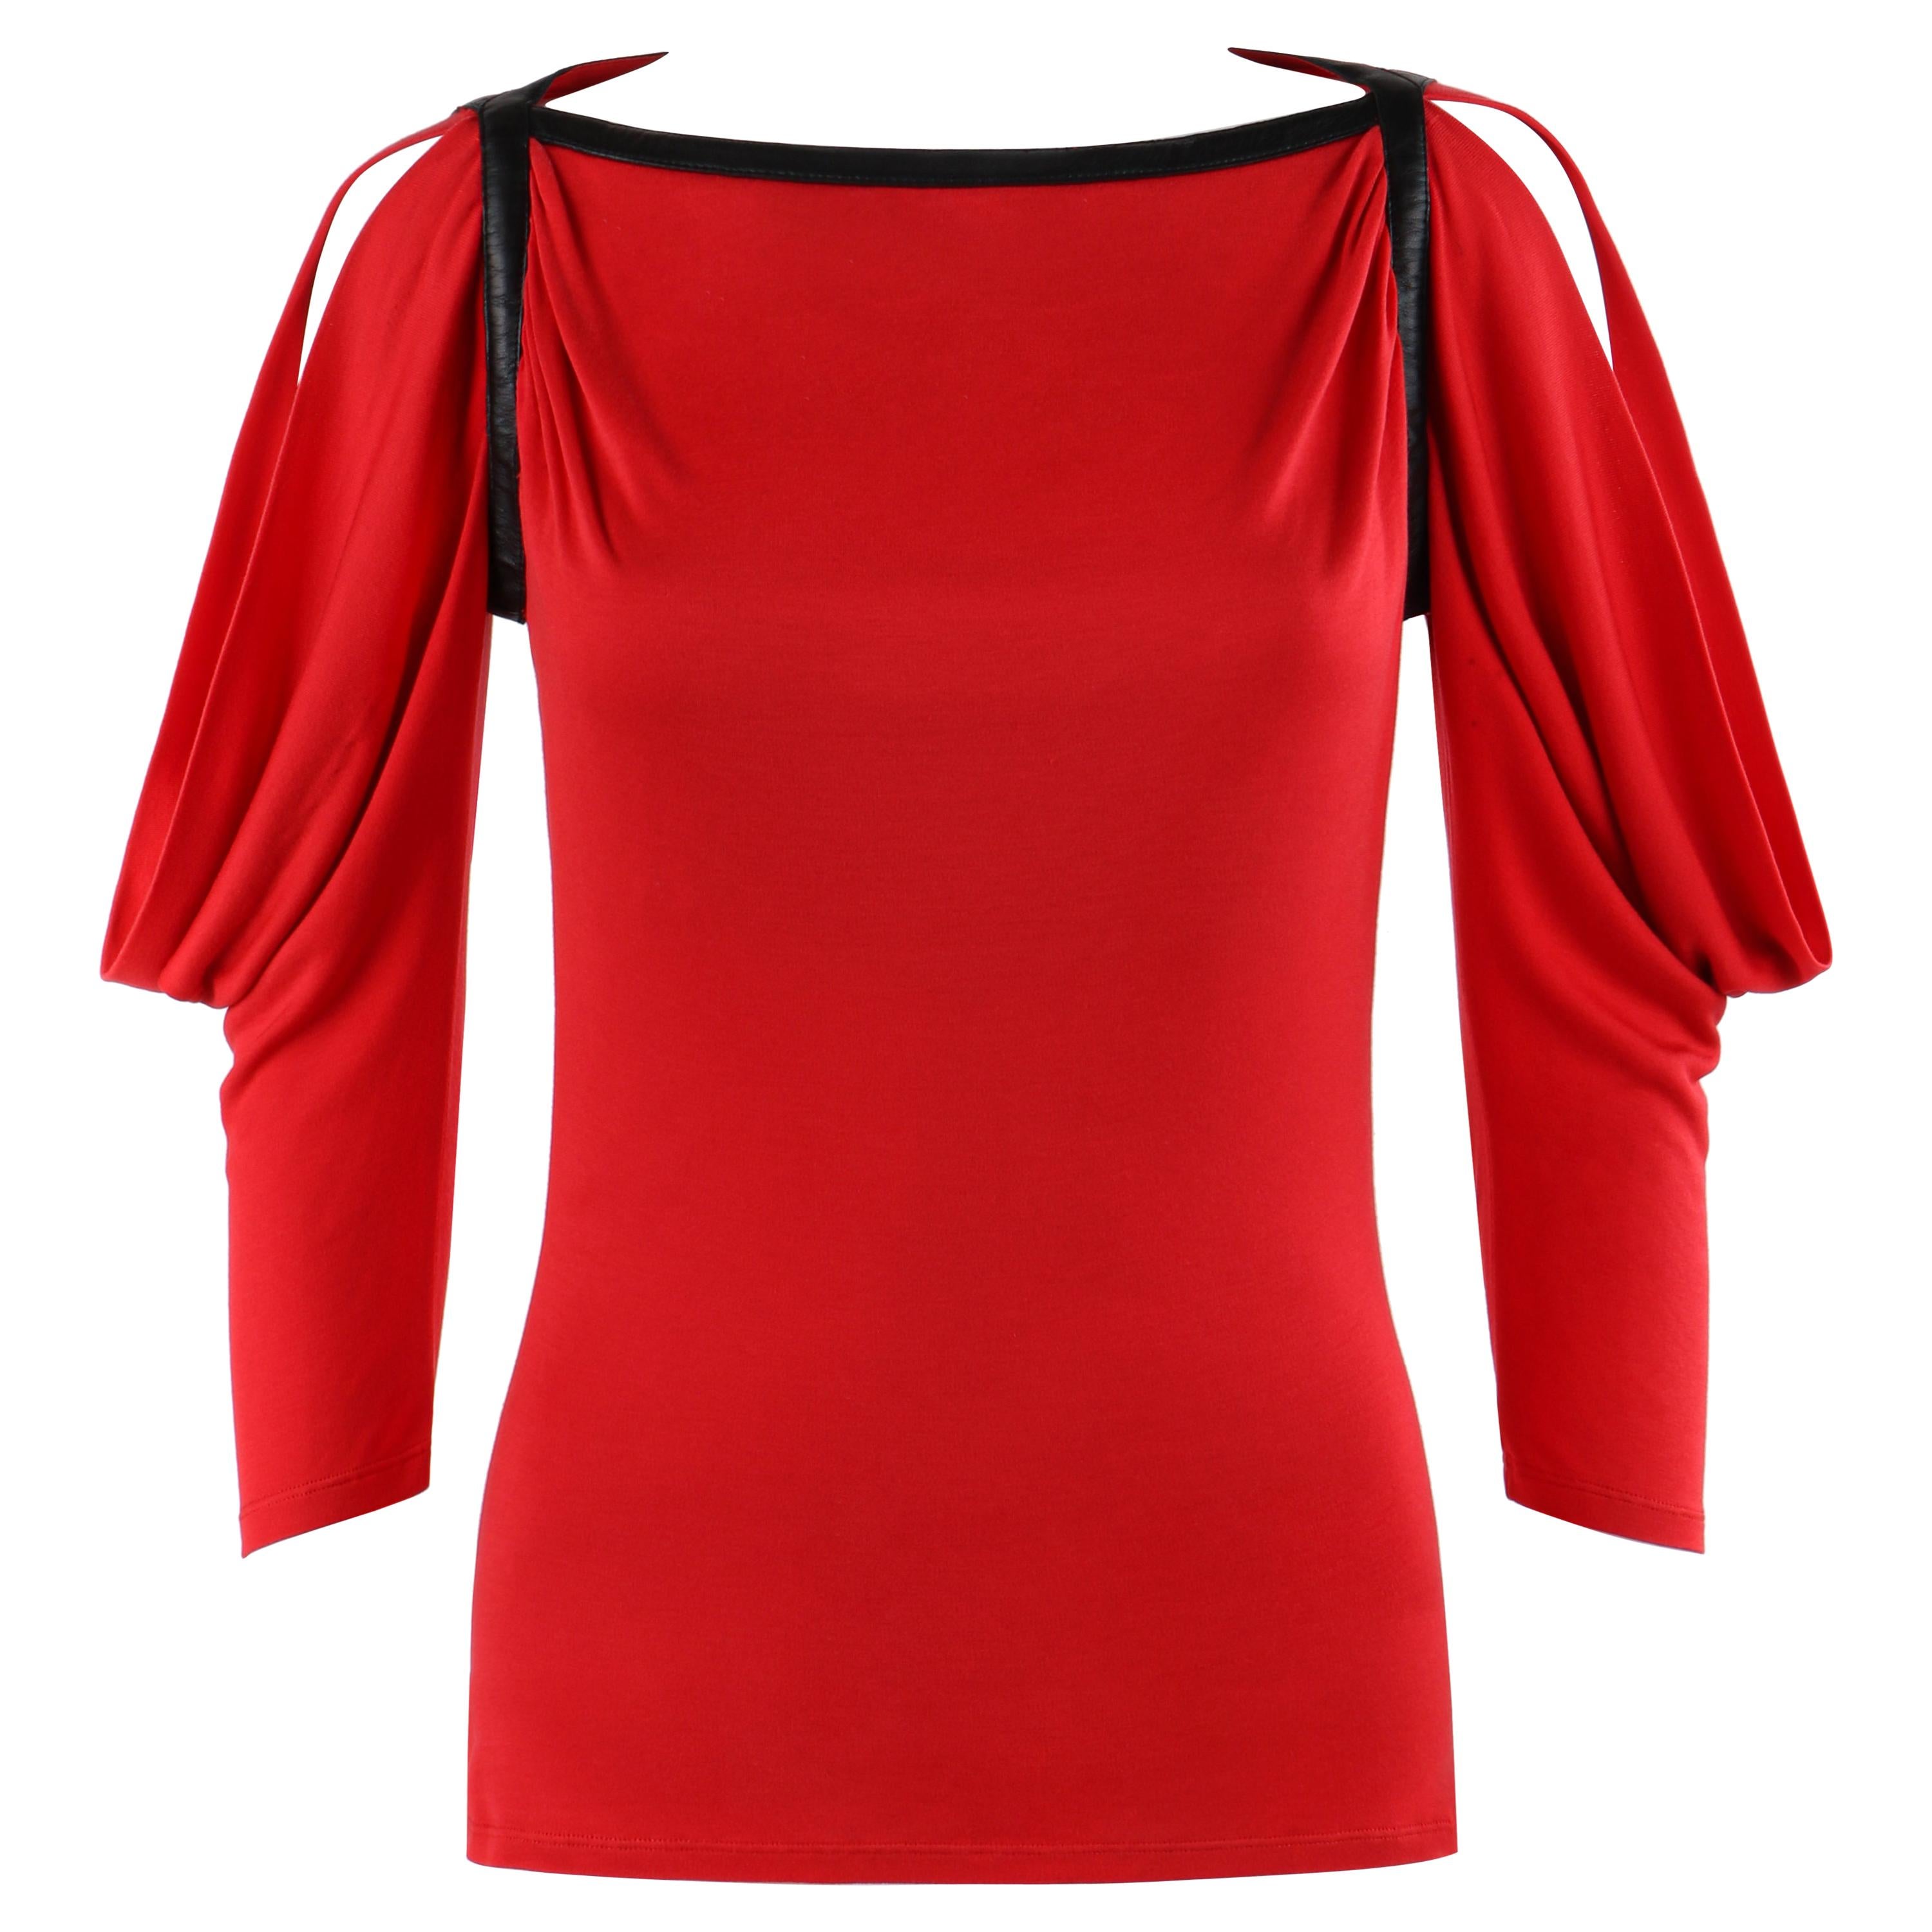 ALEXANDER McQUEEN A/W 2003 Red Square Neck Cowled ¾ Length Dolman Sleeve Blouse 